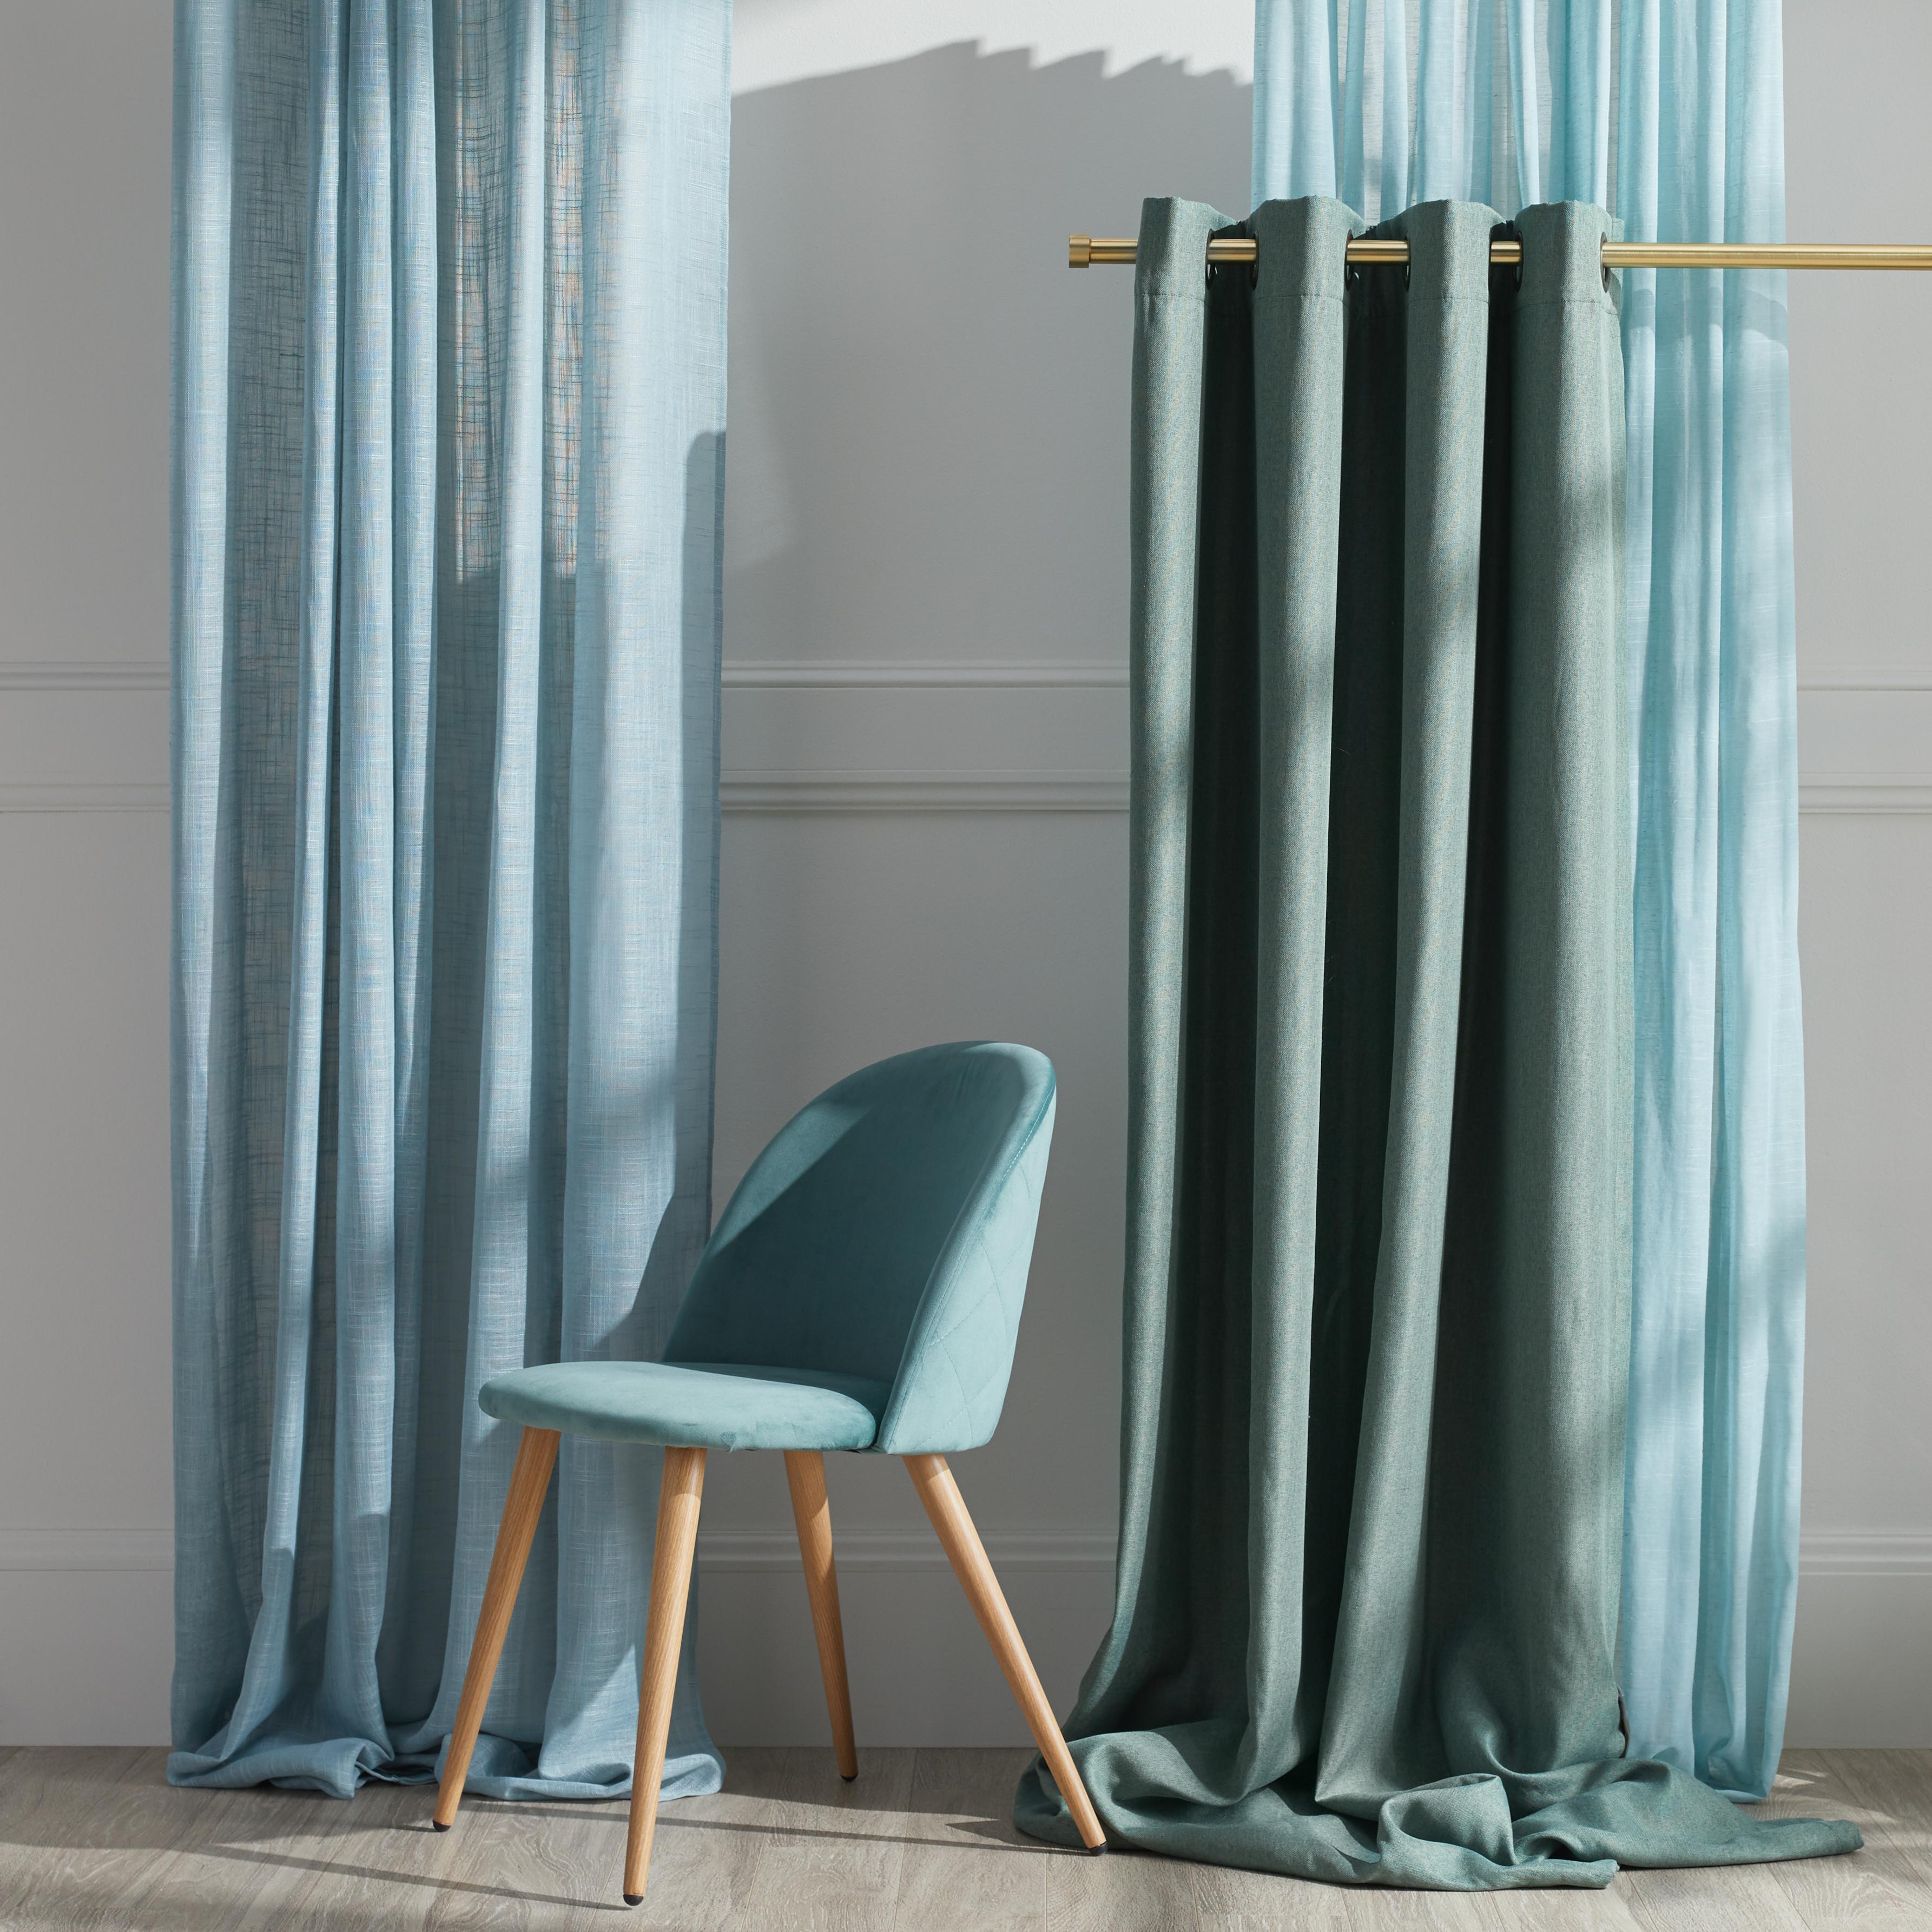 save an extra 15% on Select Window Treatments*